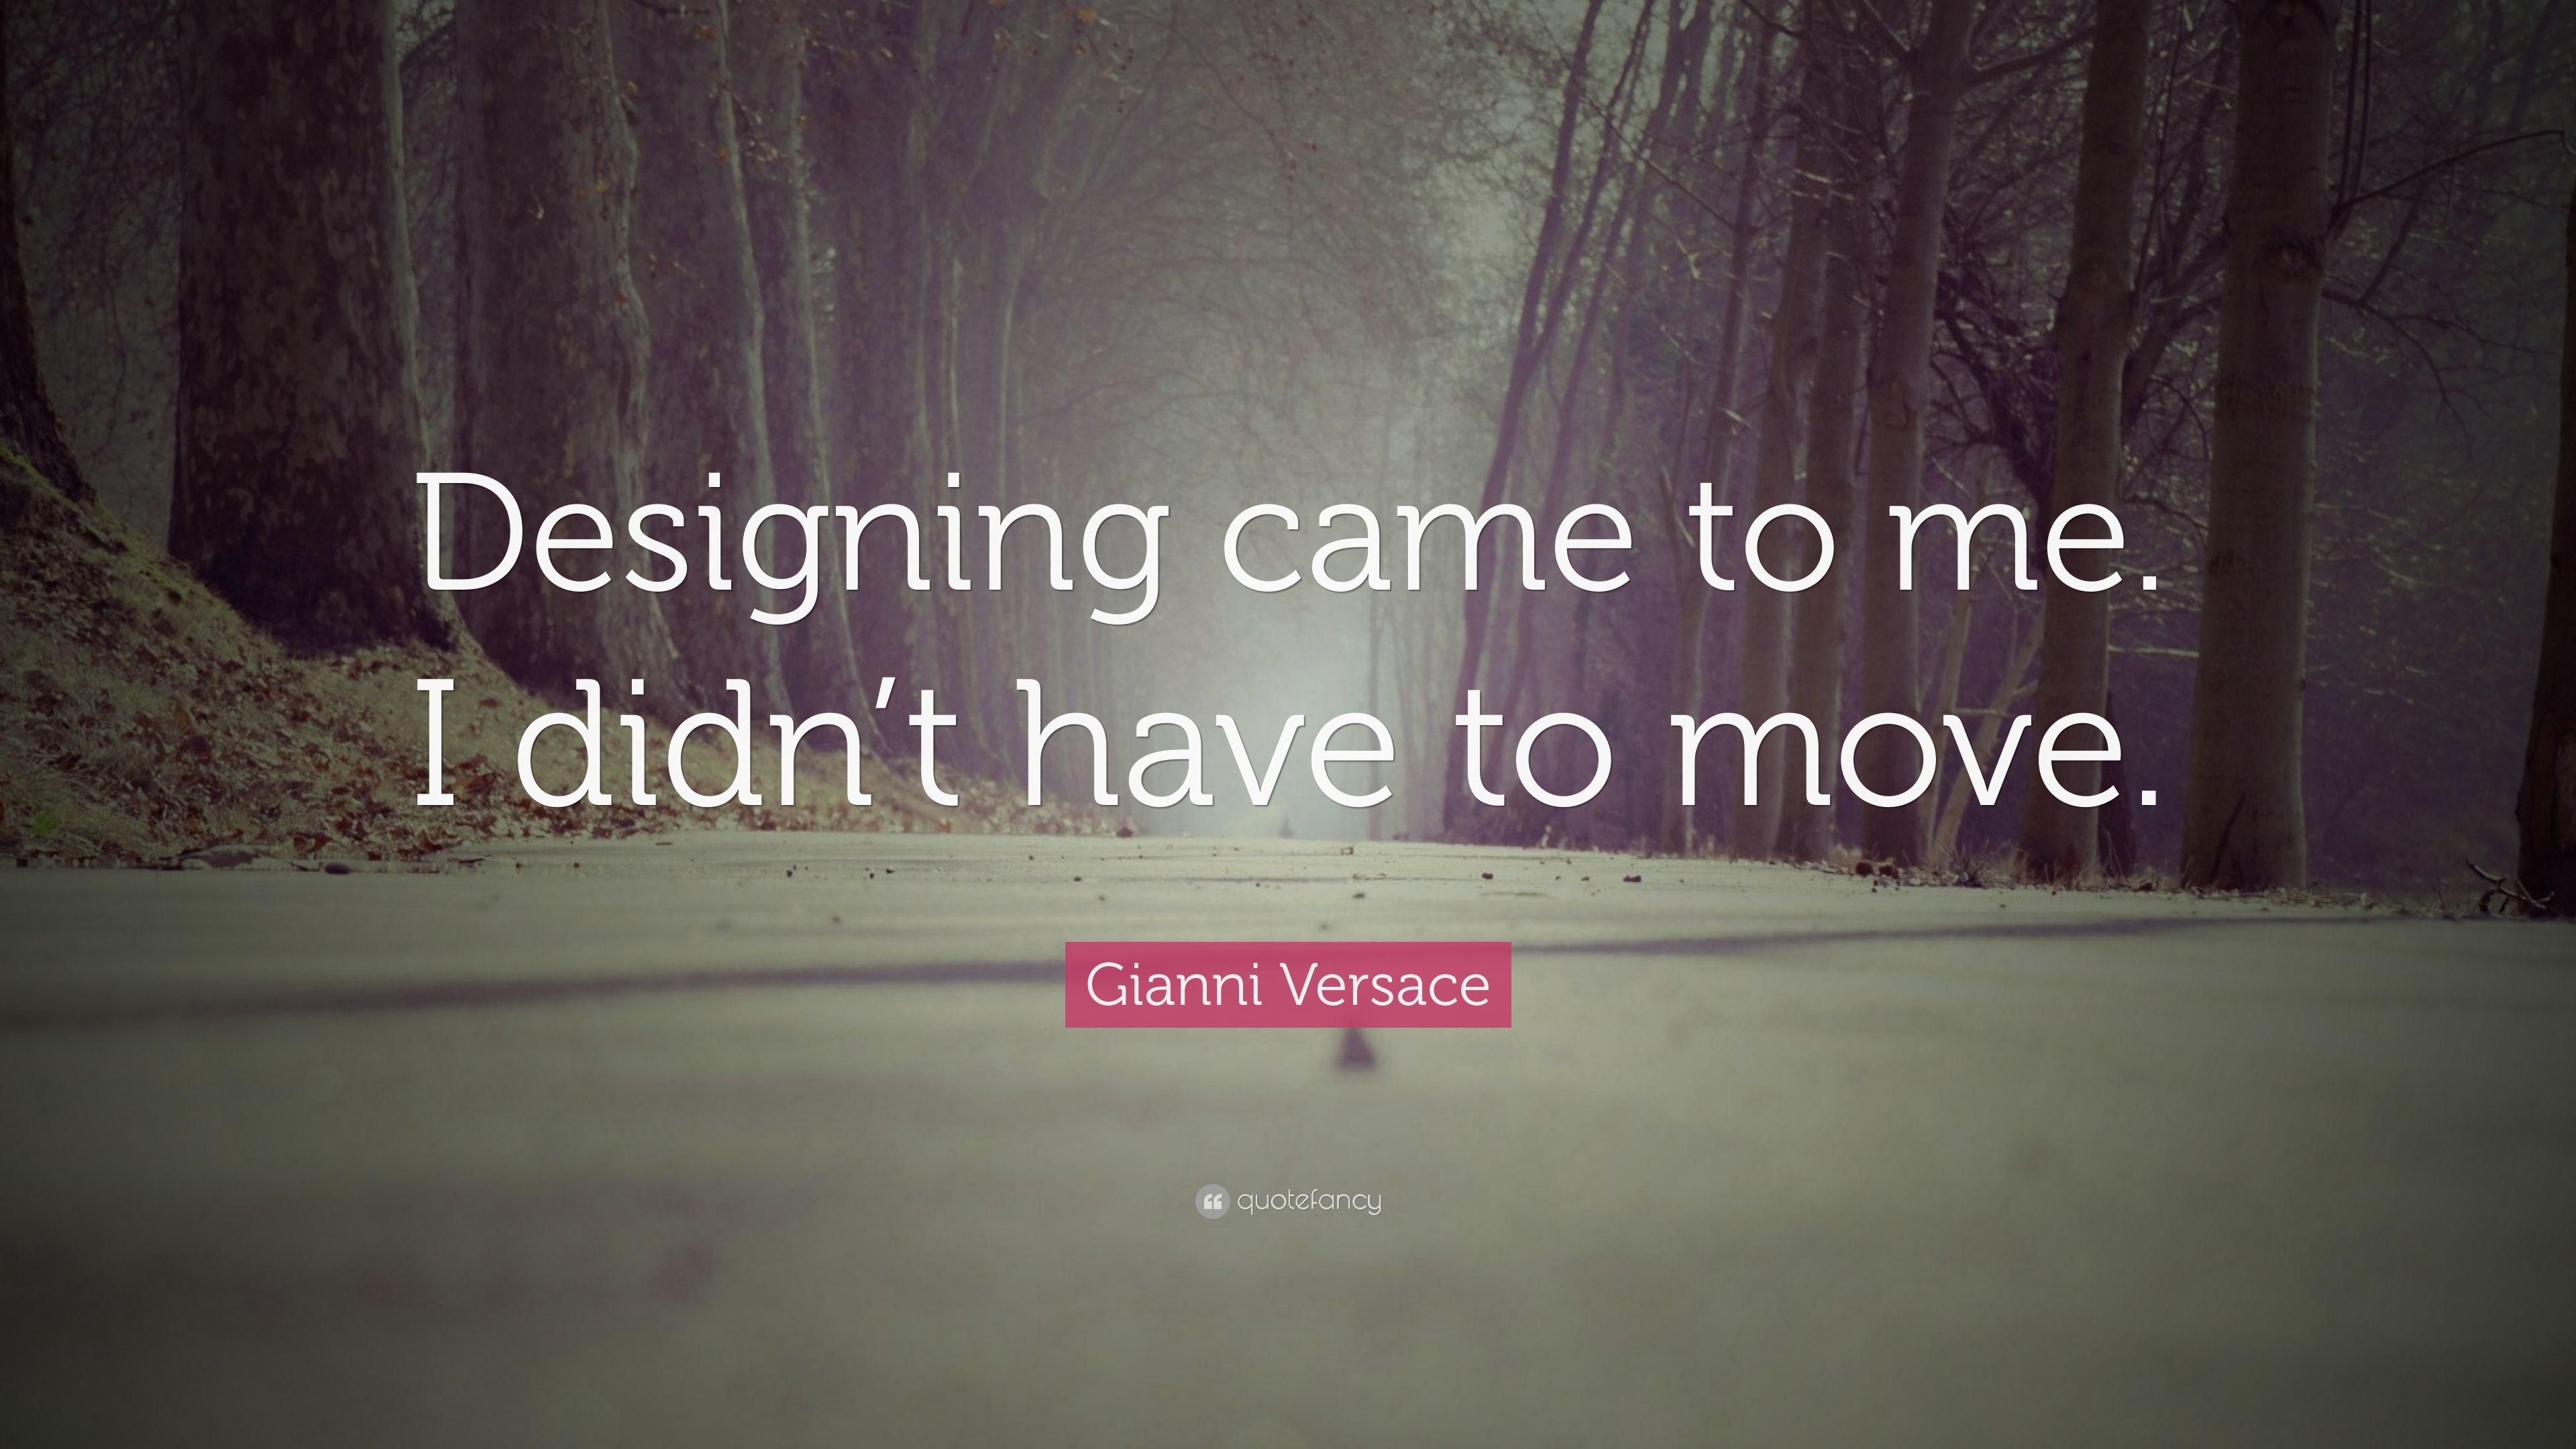 Gianni Versace Quote: "Designing came to me. 